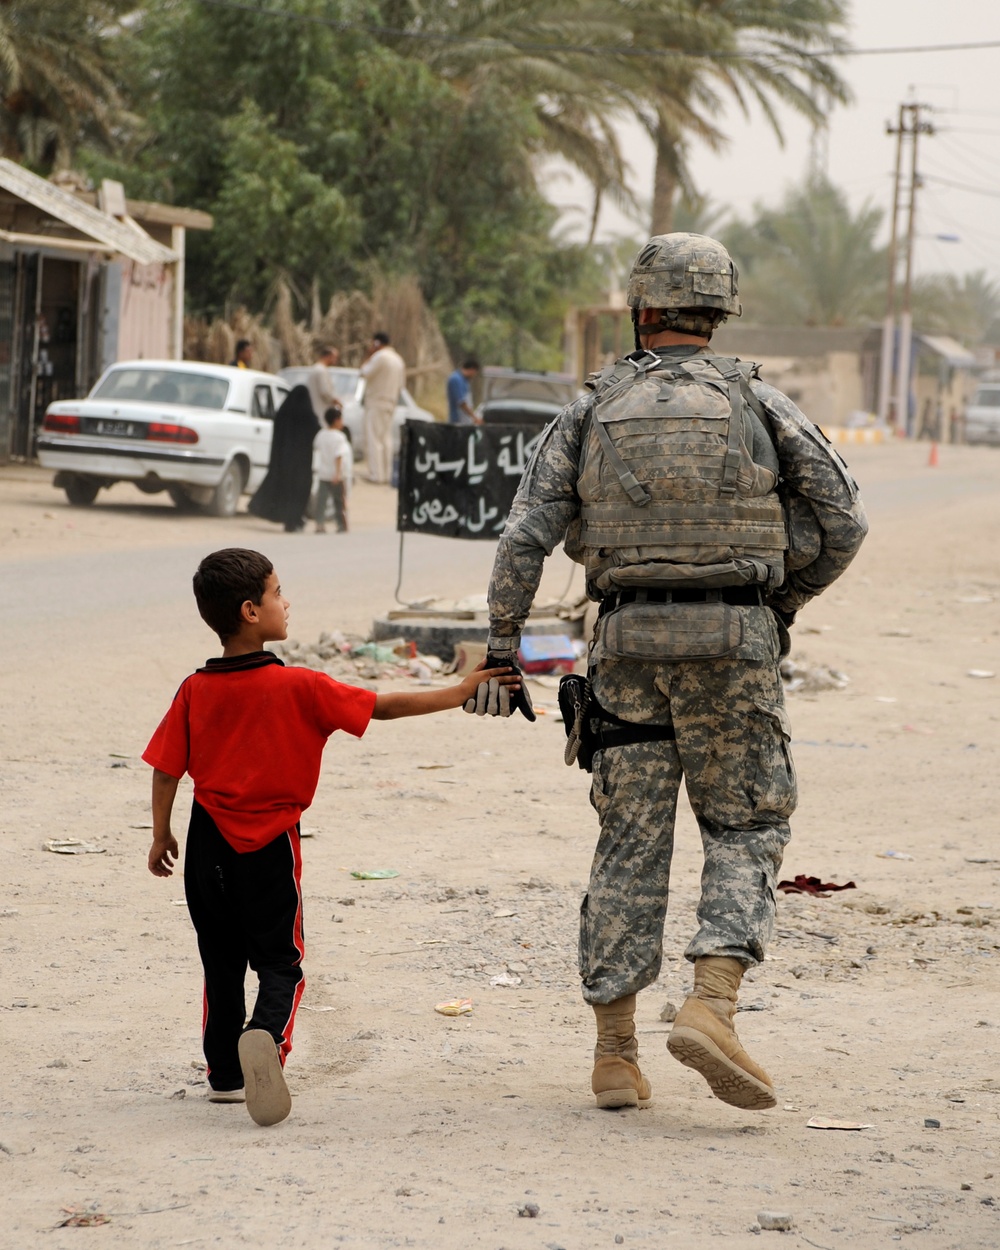 RED HORSE Airmen give Iraqis reason for hope